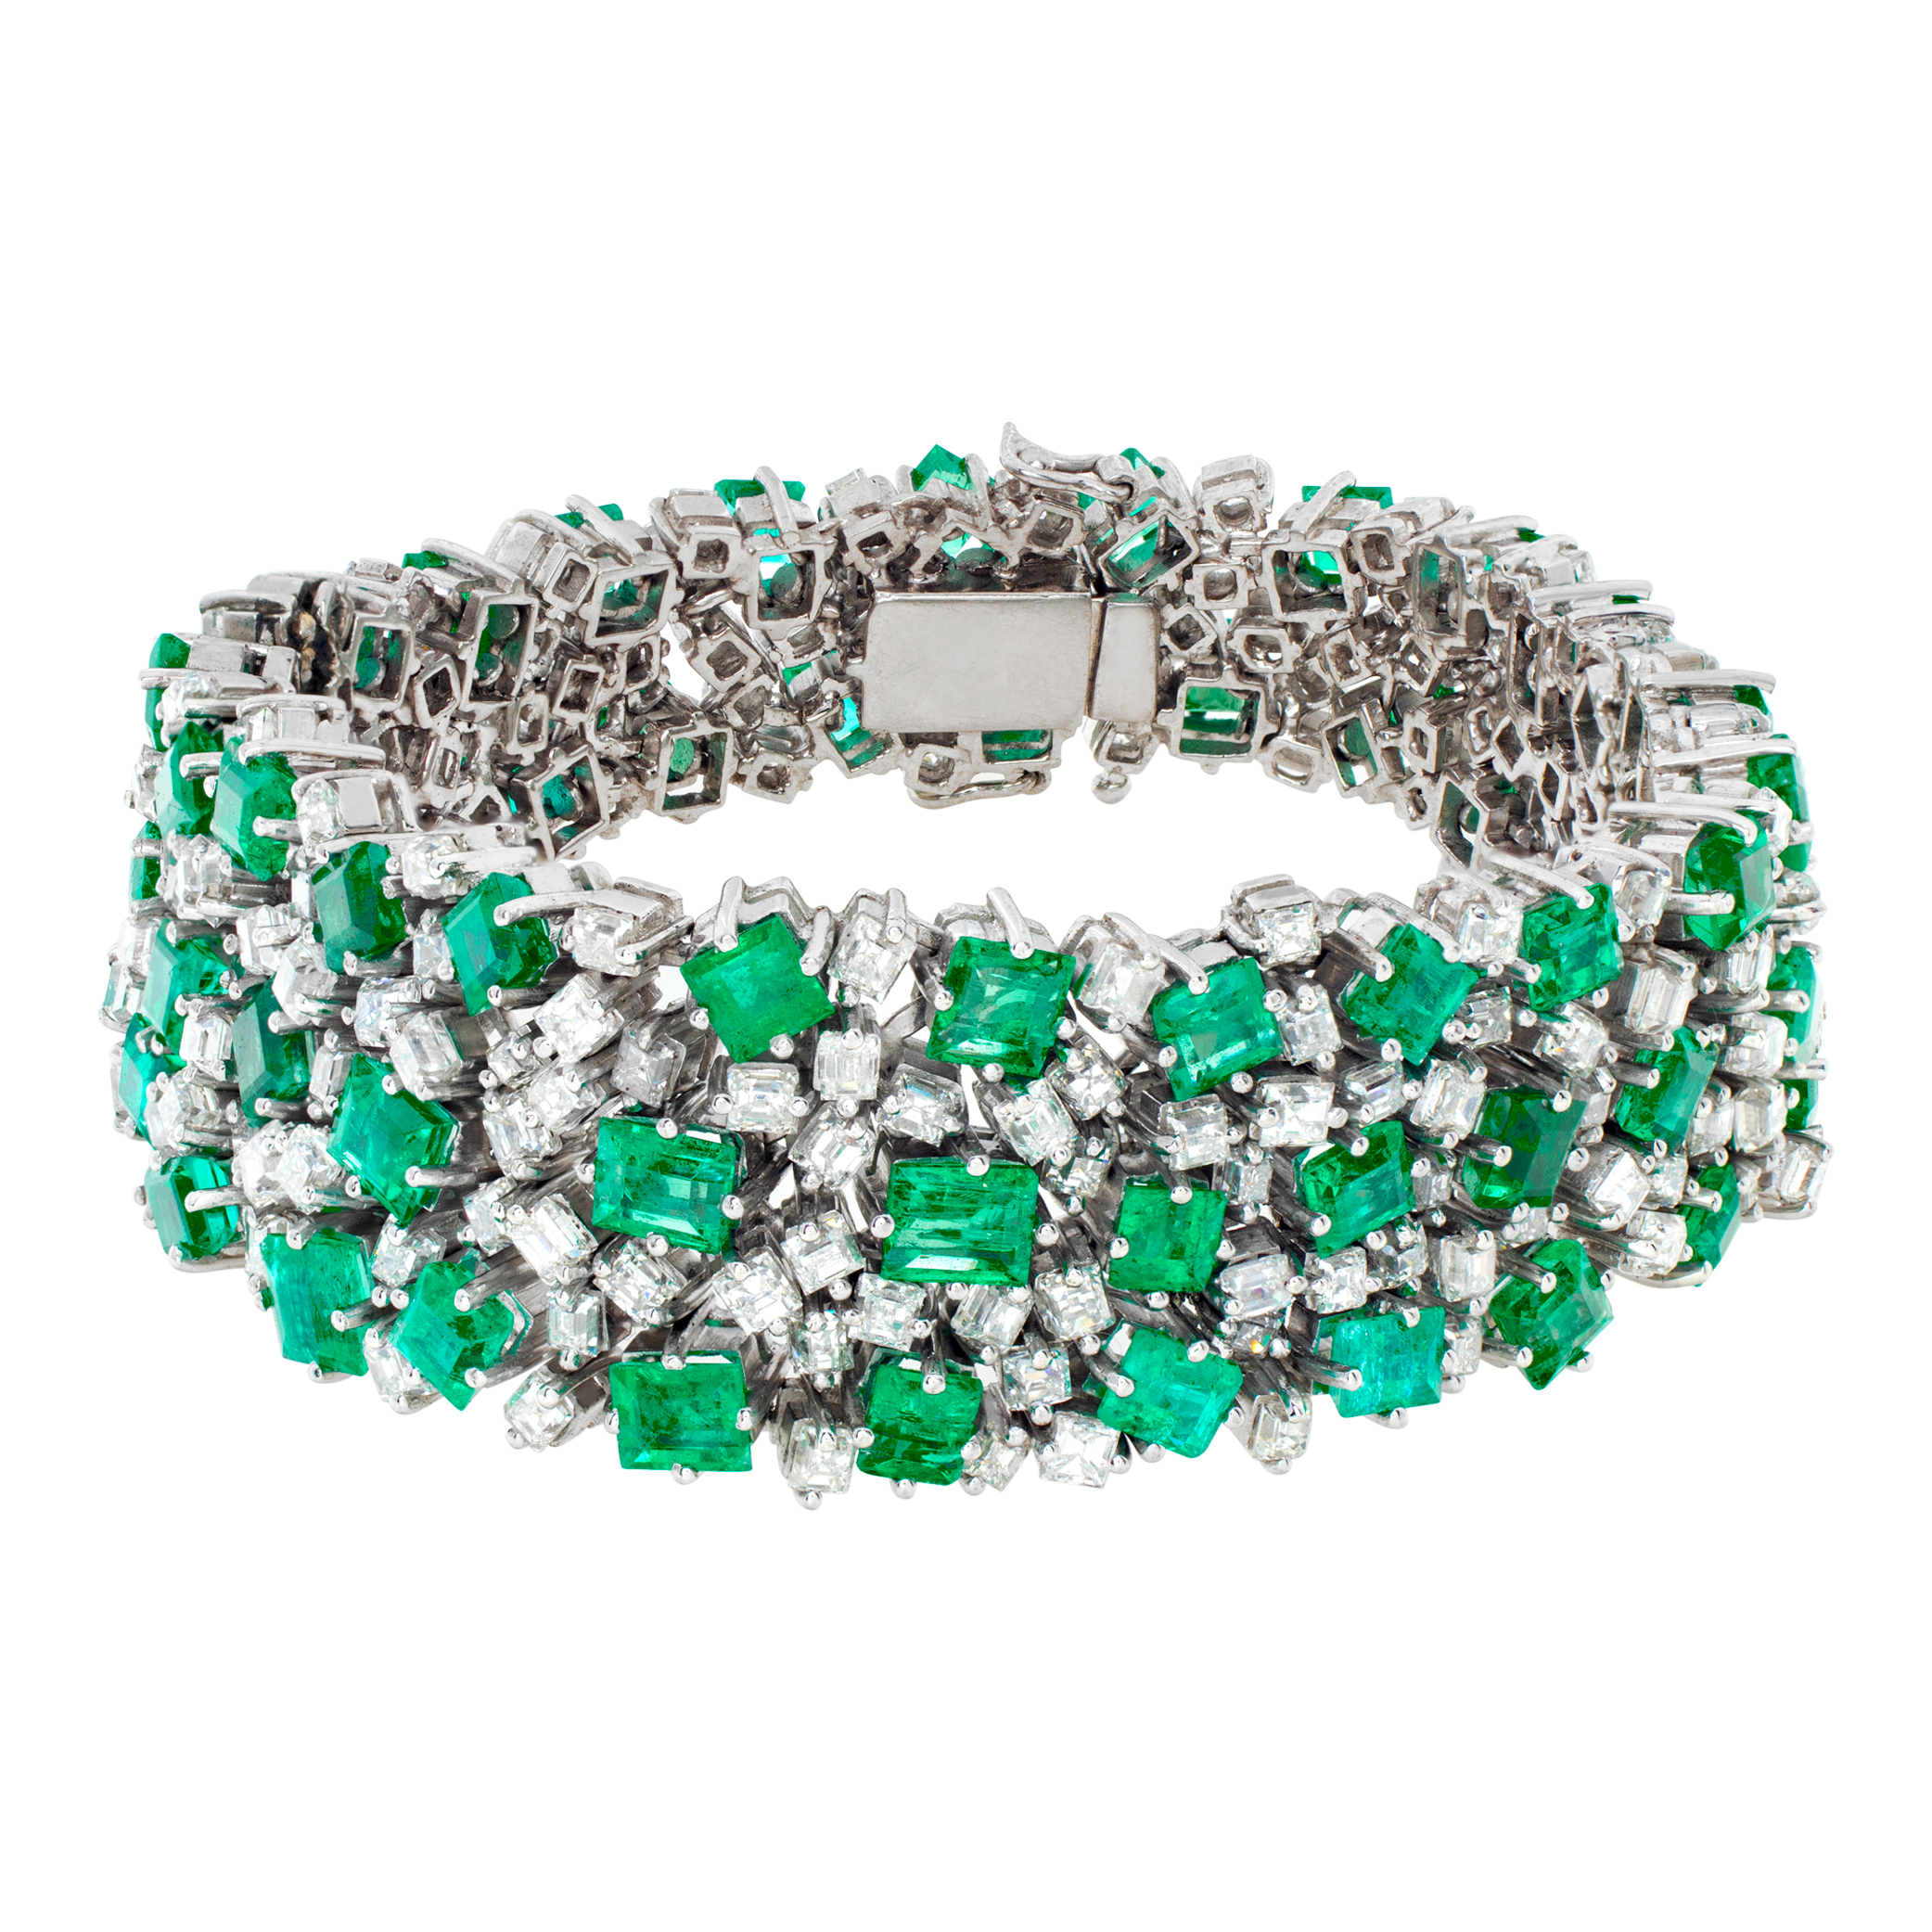 Vintage diamond and emerald platinum bracelet with over 17 carats in diamonds (H, VS) and 32 carats in Columbian emeralds. Length: 7 inches. Width tapers from 0.75 to 0.50 inches